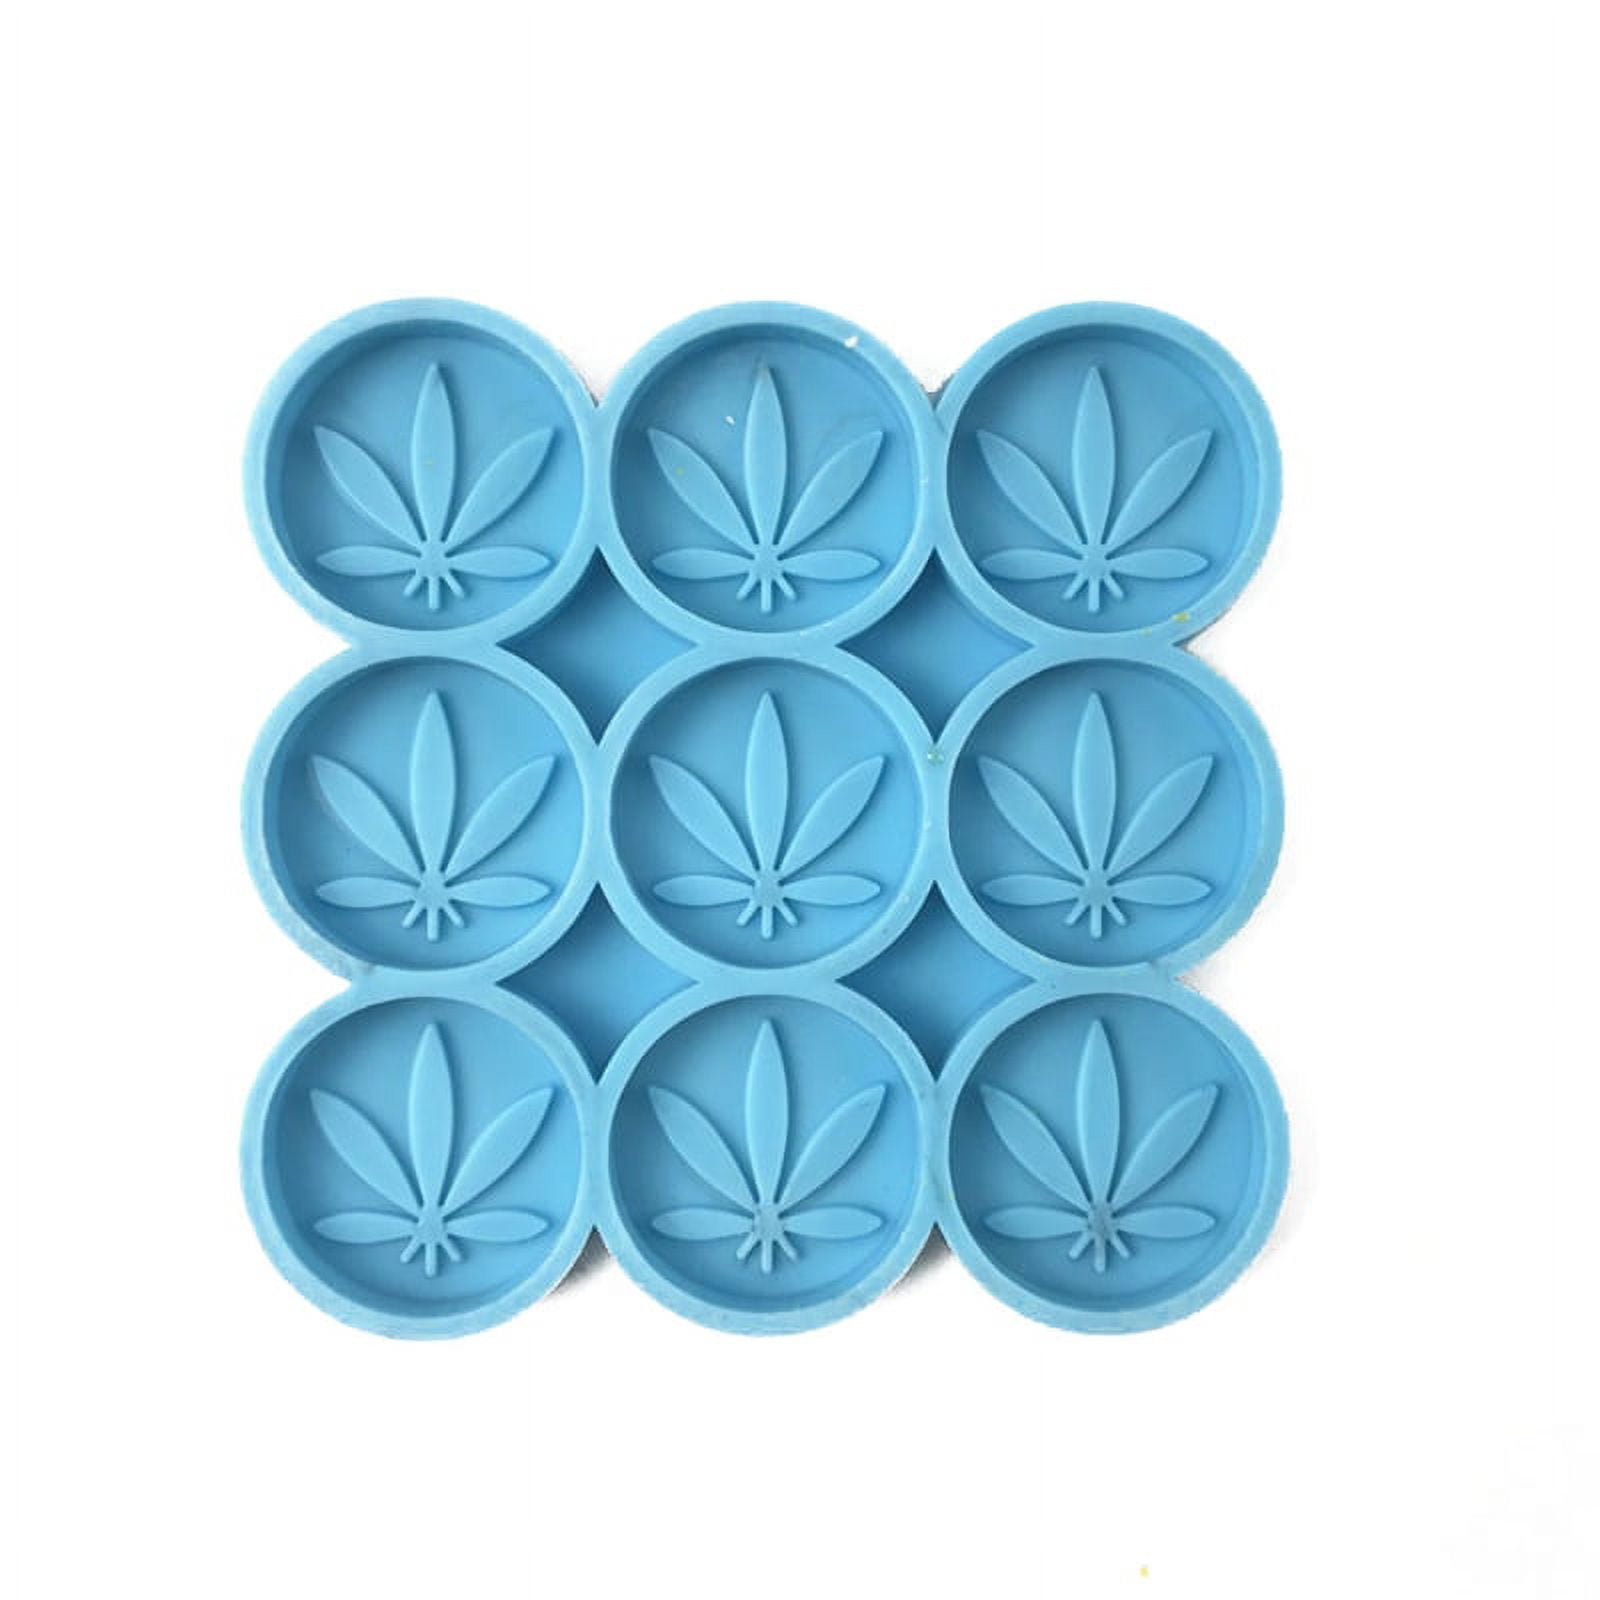 Tray Resin Molds, Ashtray Resin Molds, Smoker Set Silicone Mold, Grinder  Resin Mold, Rolling Tray Molds, DIY Craft Casting Resin Supplies 